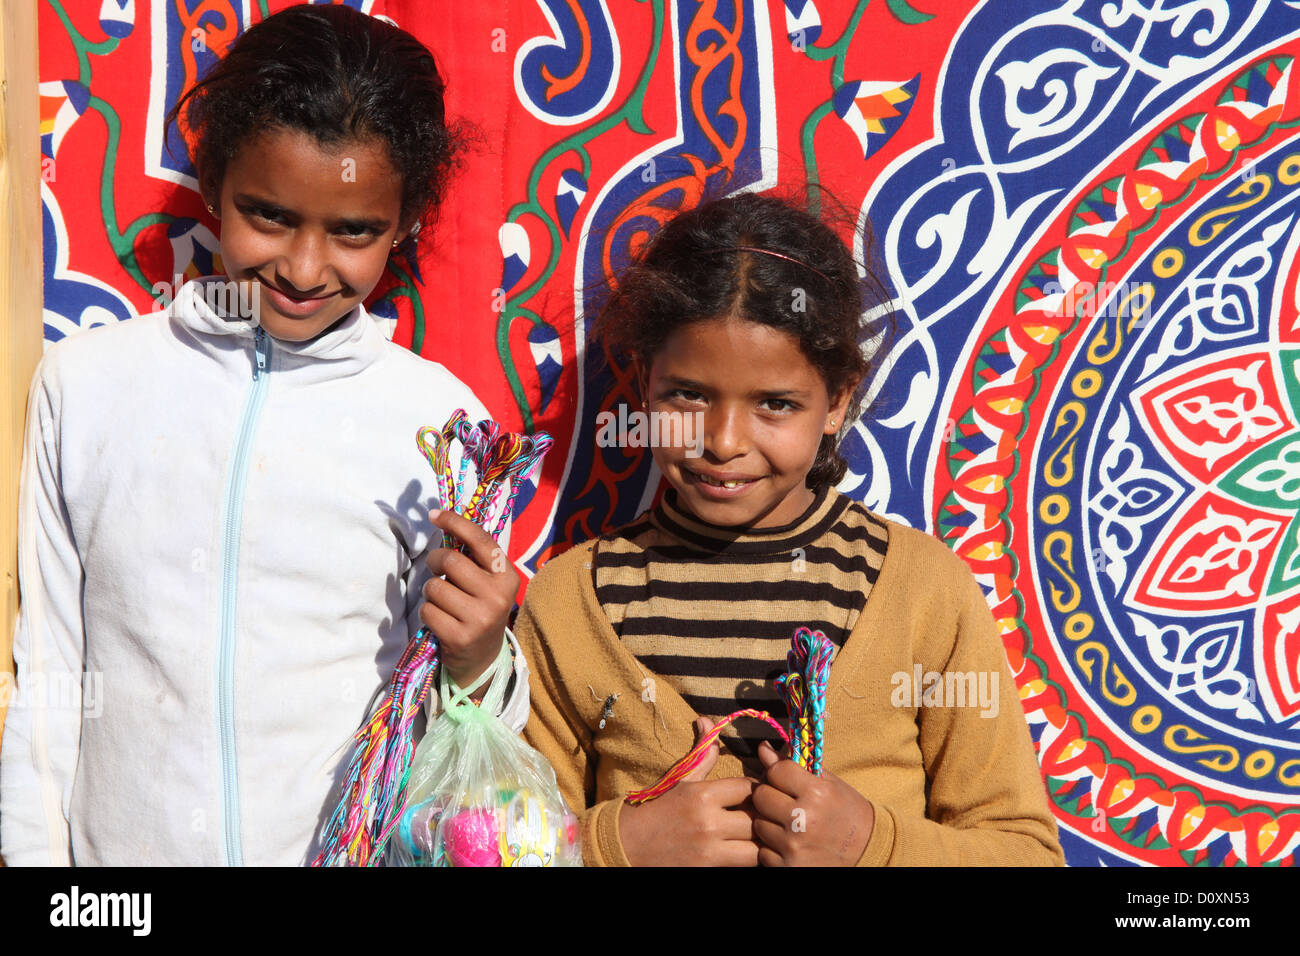 DAHAB - JANUARY 23. Young street sellers showing off their bracelets in Dahab, Egypt. It provides income for their families. Stock Photo